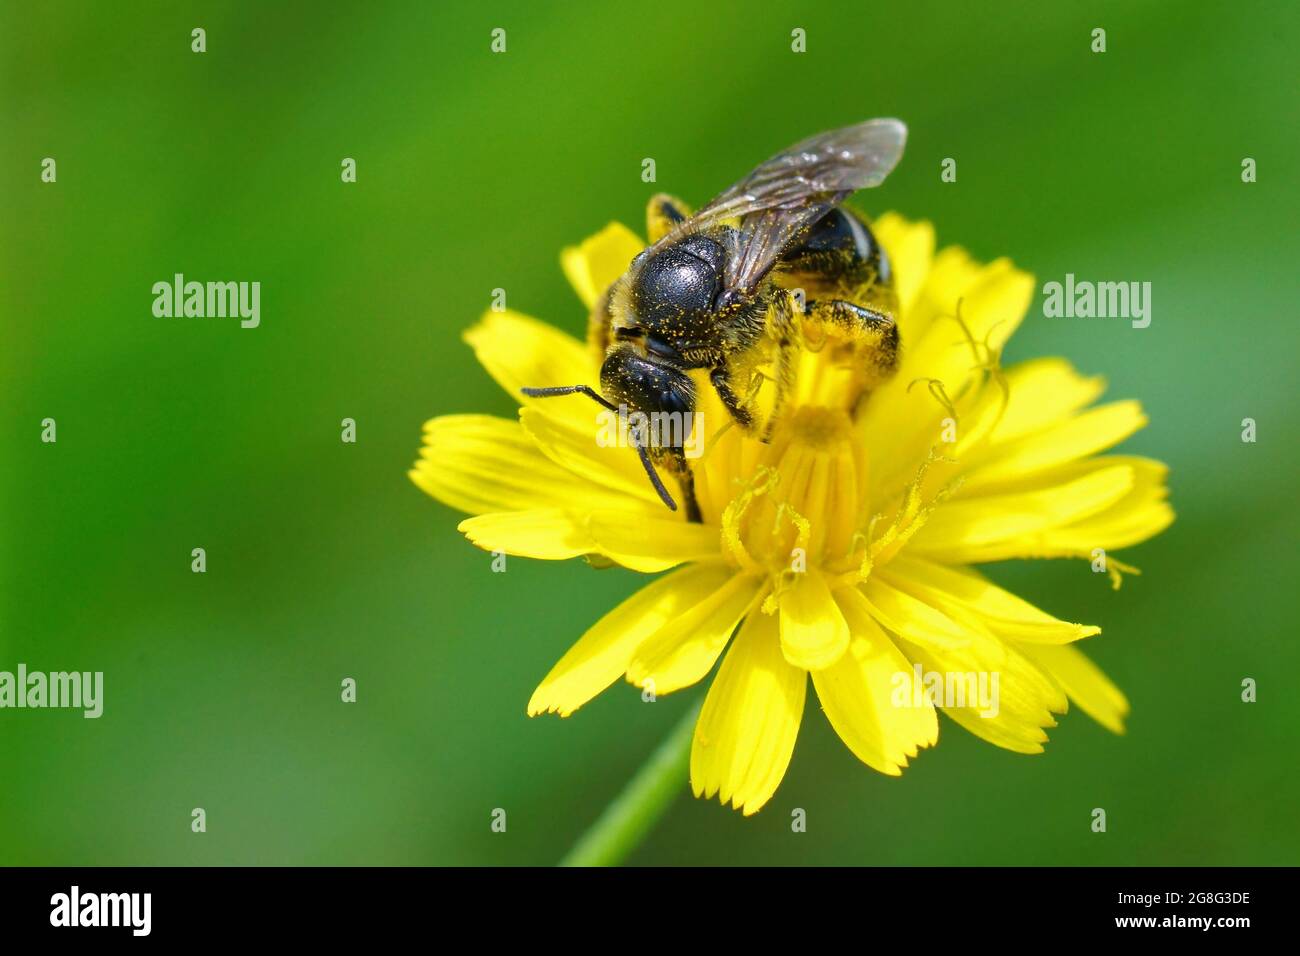 Bull-headed furow bee collecting pollen from the yellow flower of hypochaeris radicata Stock Photo